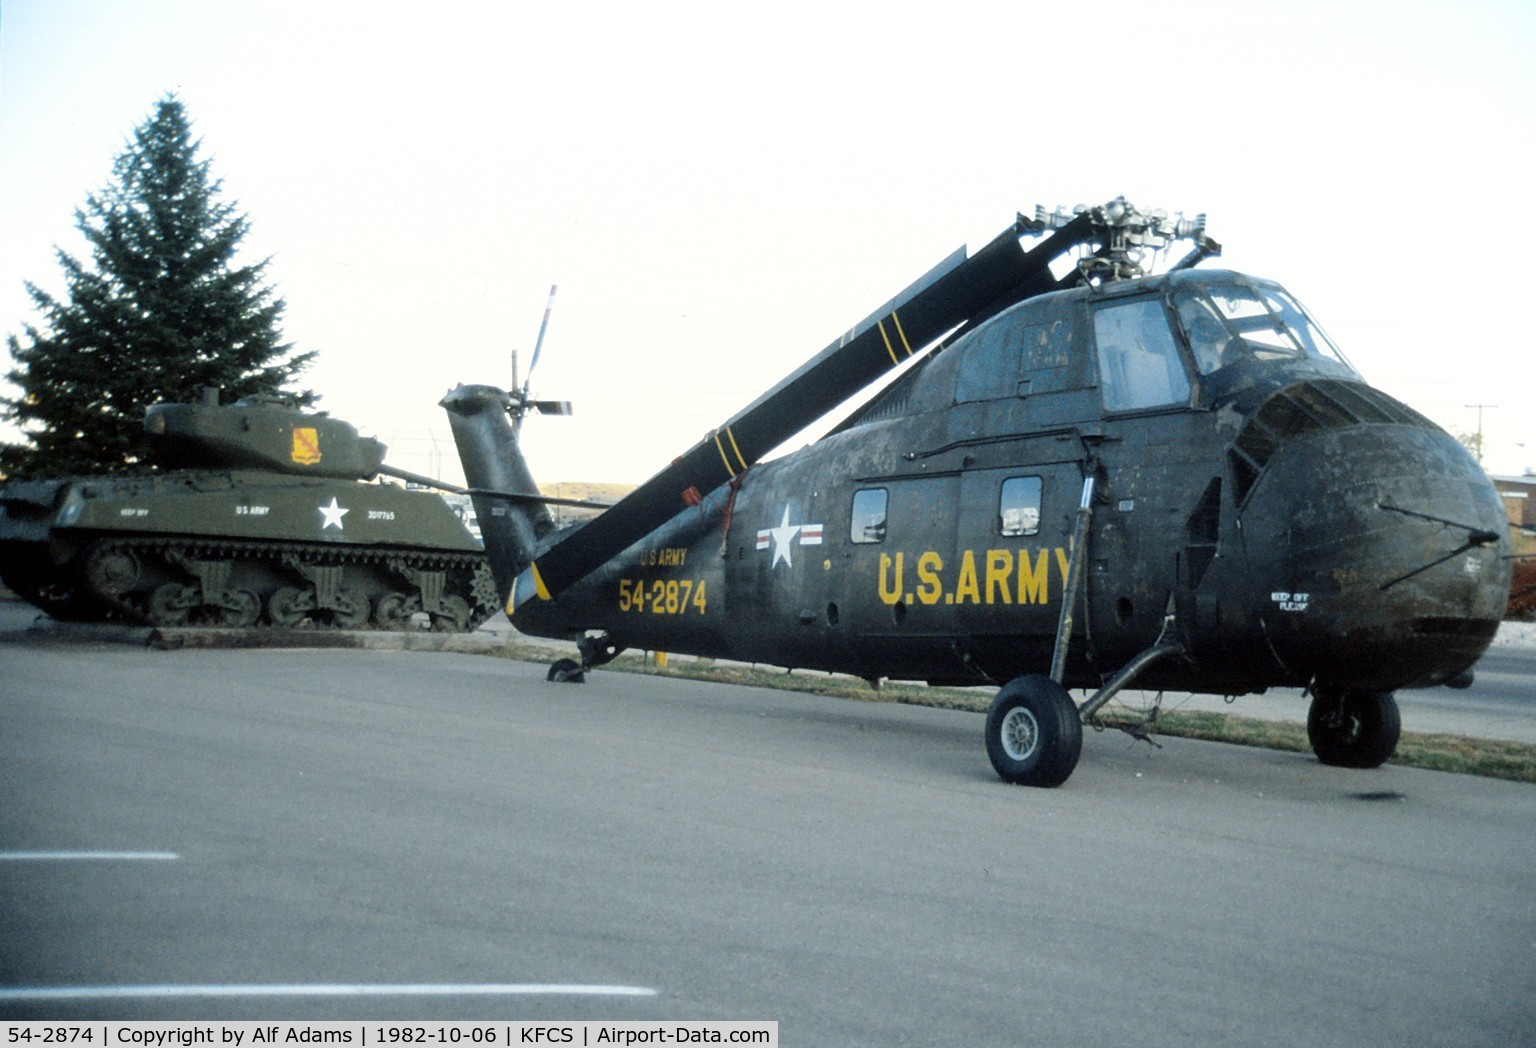 54-2874, 1956 Sikorsky H-34C Choctaw C/N 58-272, Displayed on the army base at Fort Carson, Colorado in 1982.